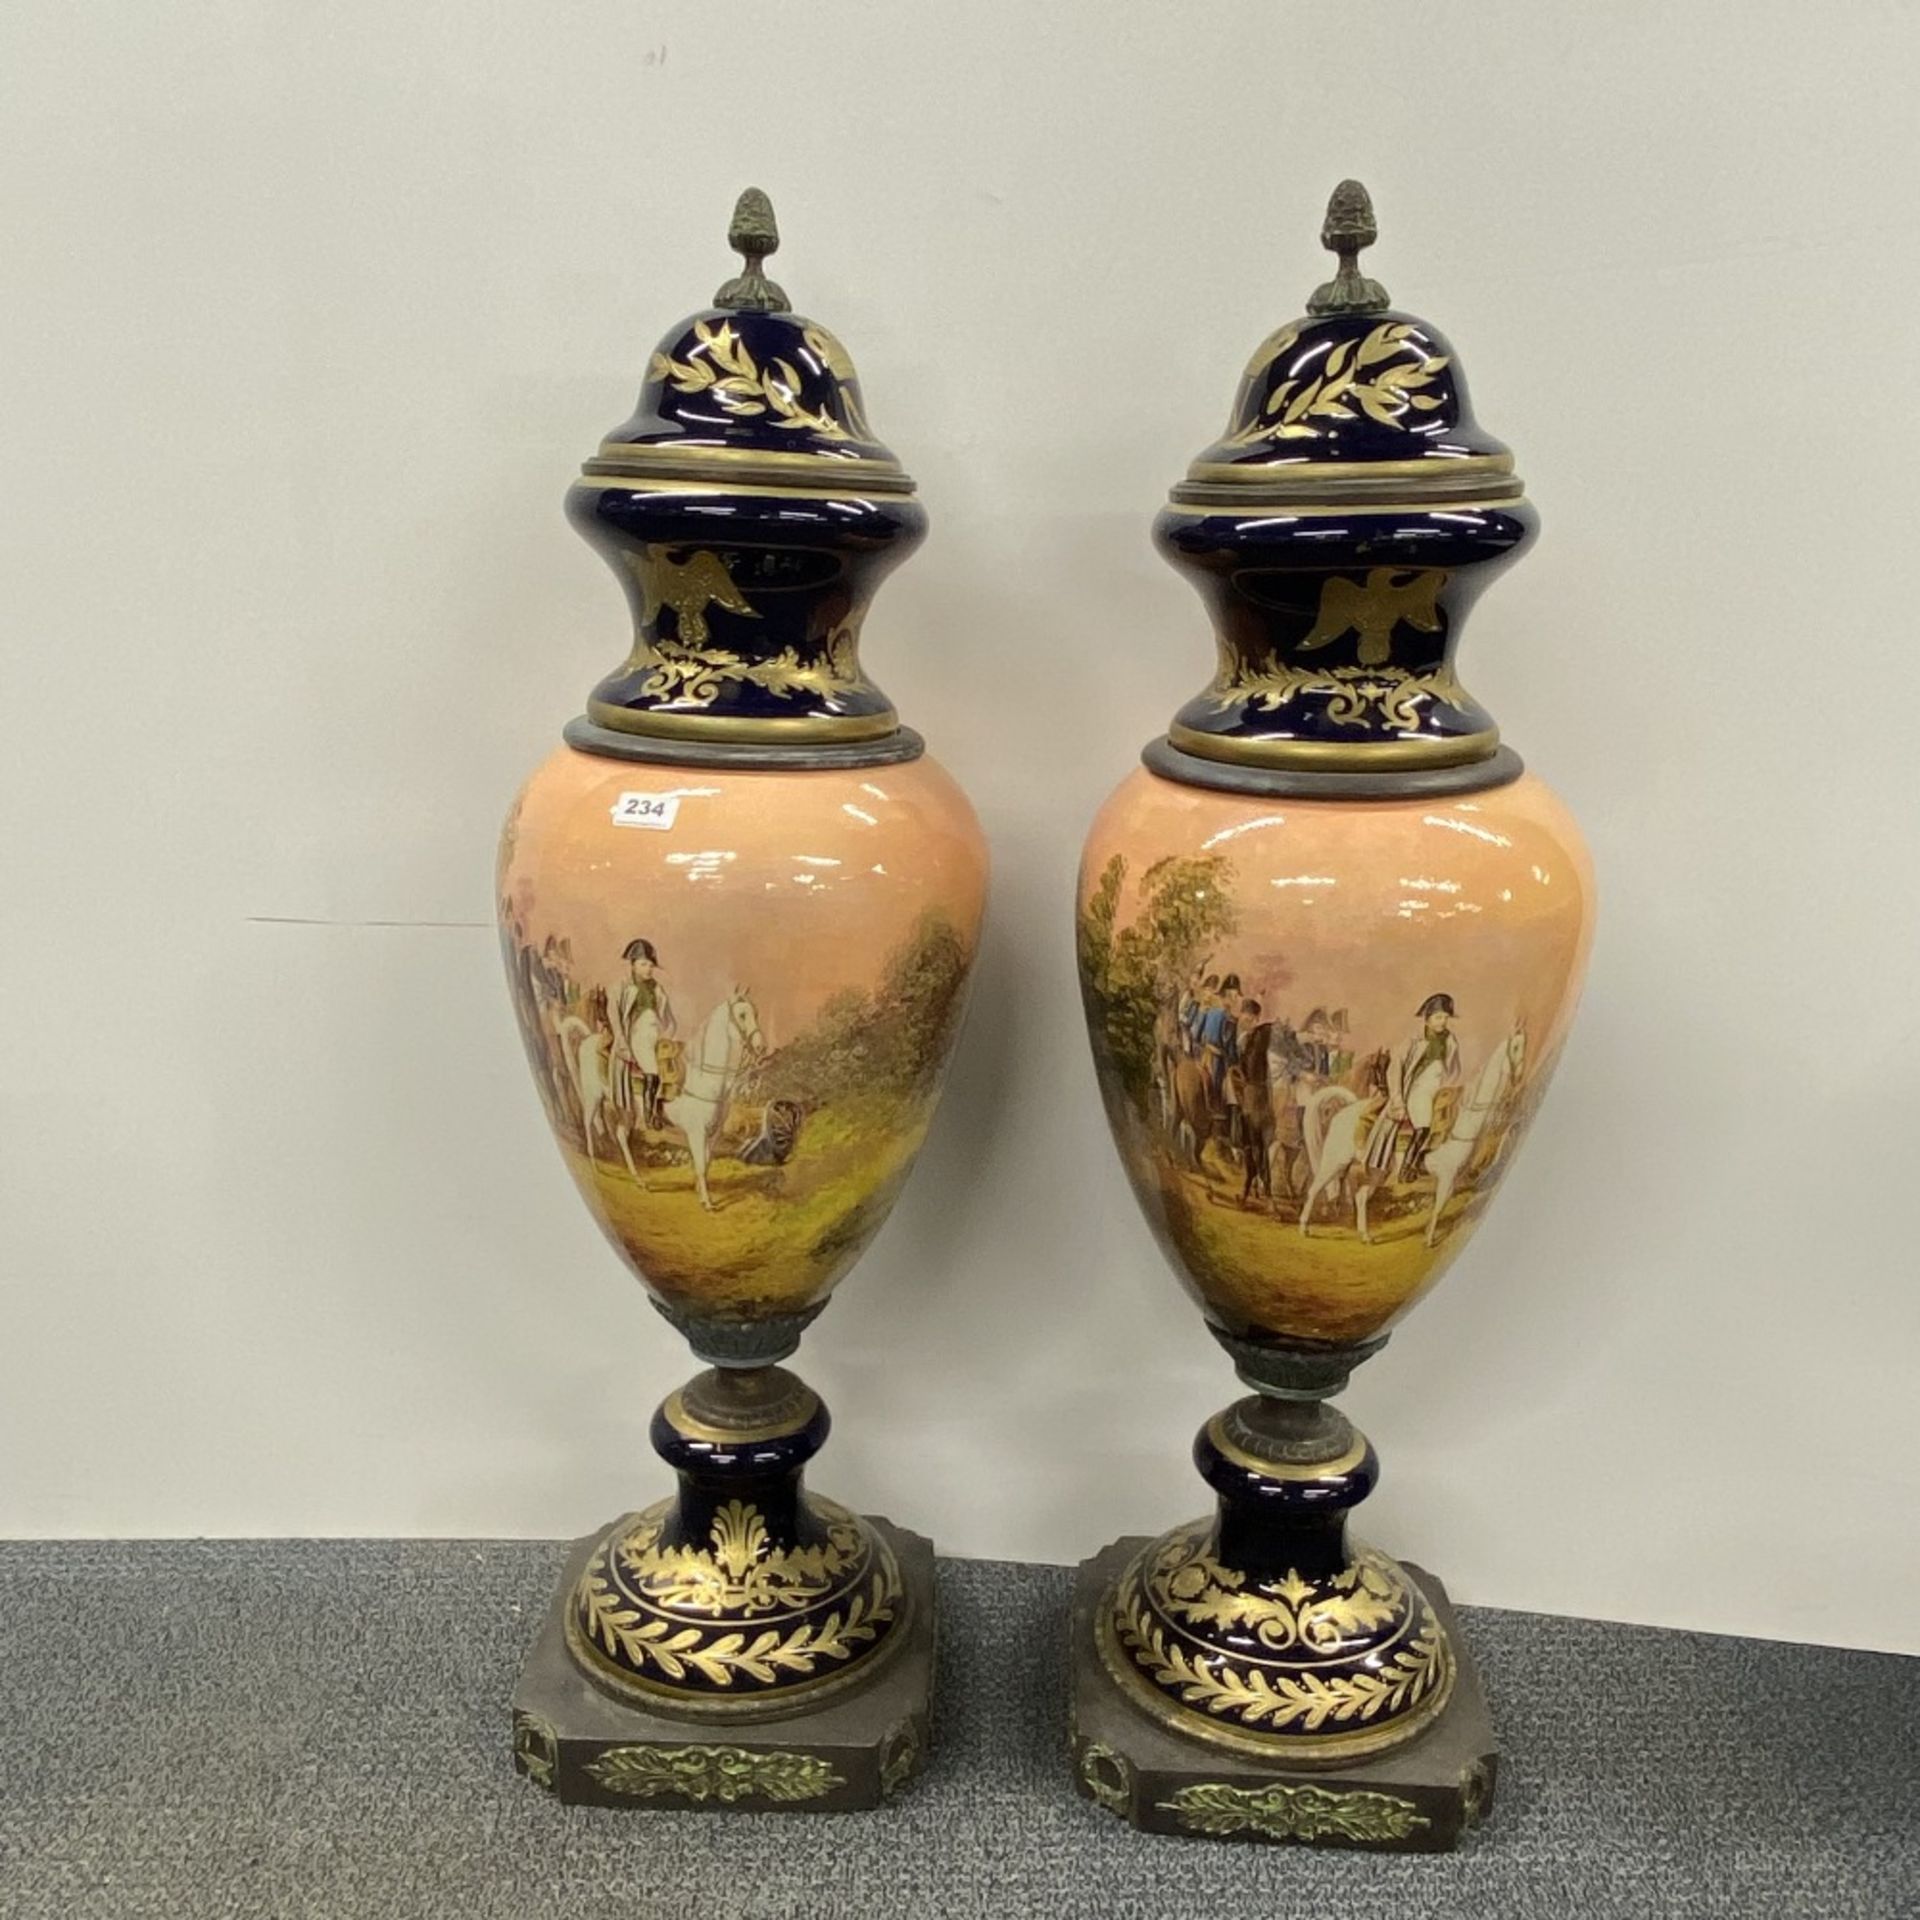 A superb pair of large Continental ceramic and bronze urns and covers, H. 102cm.